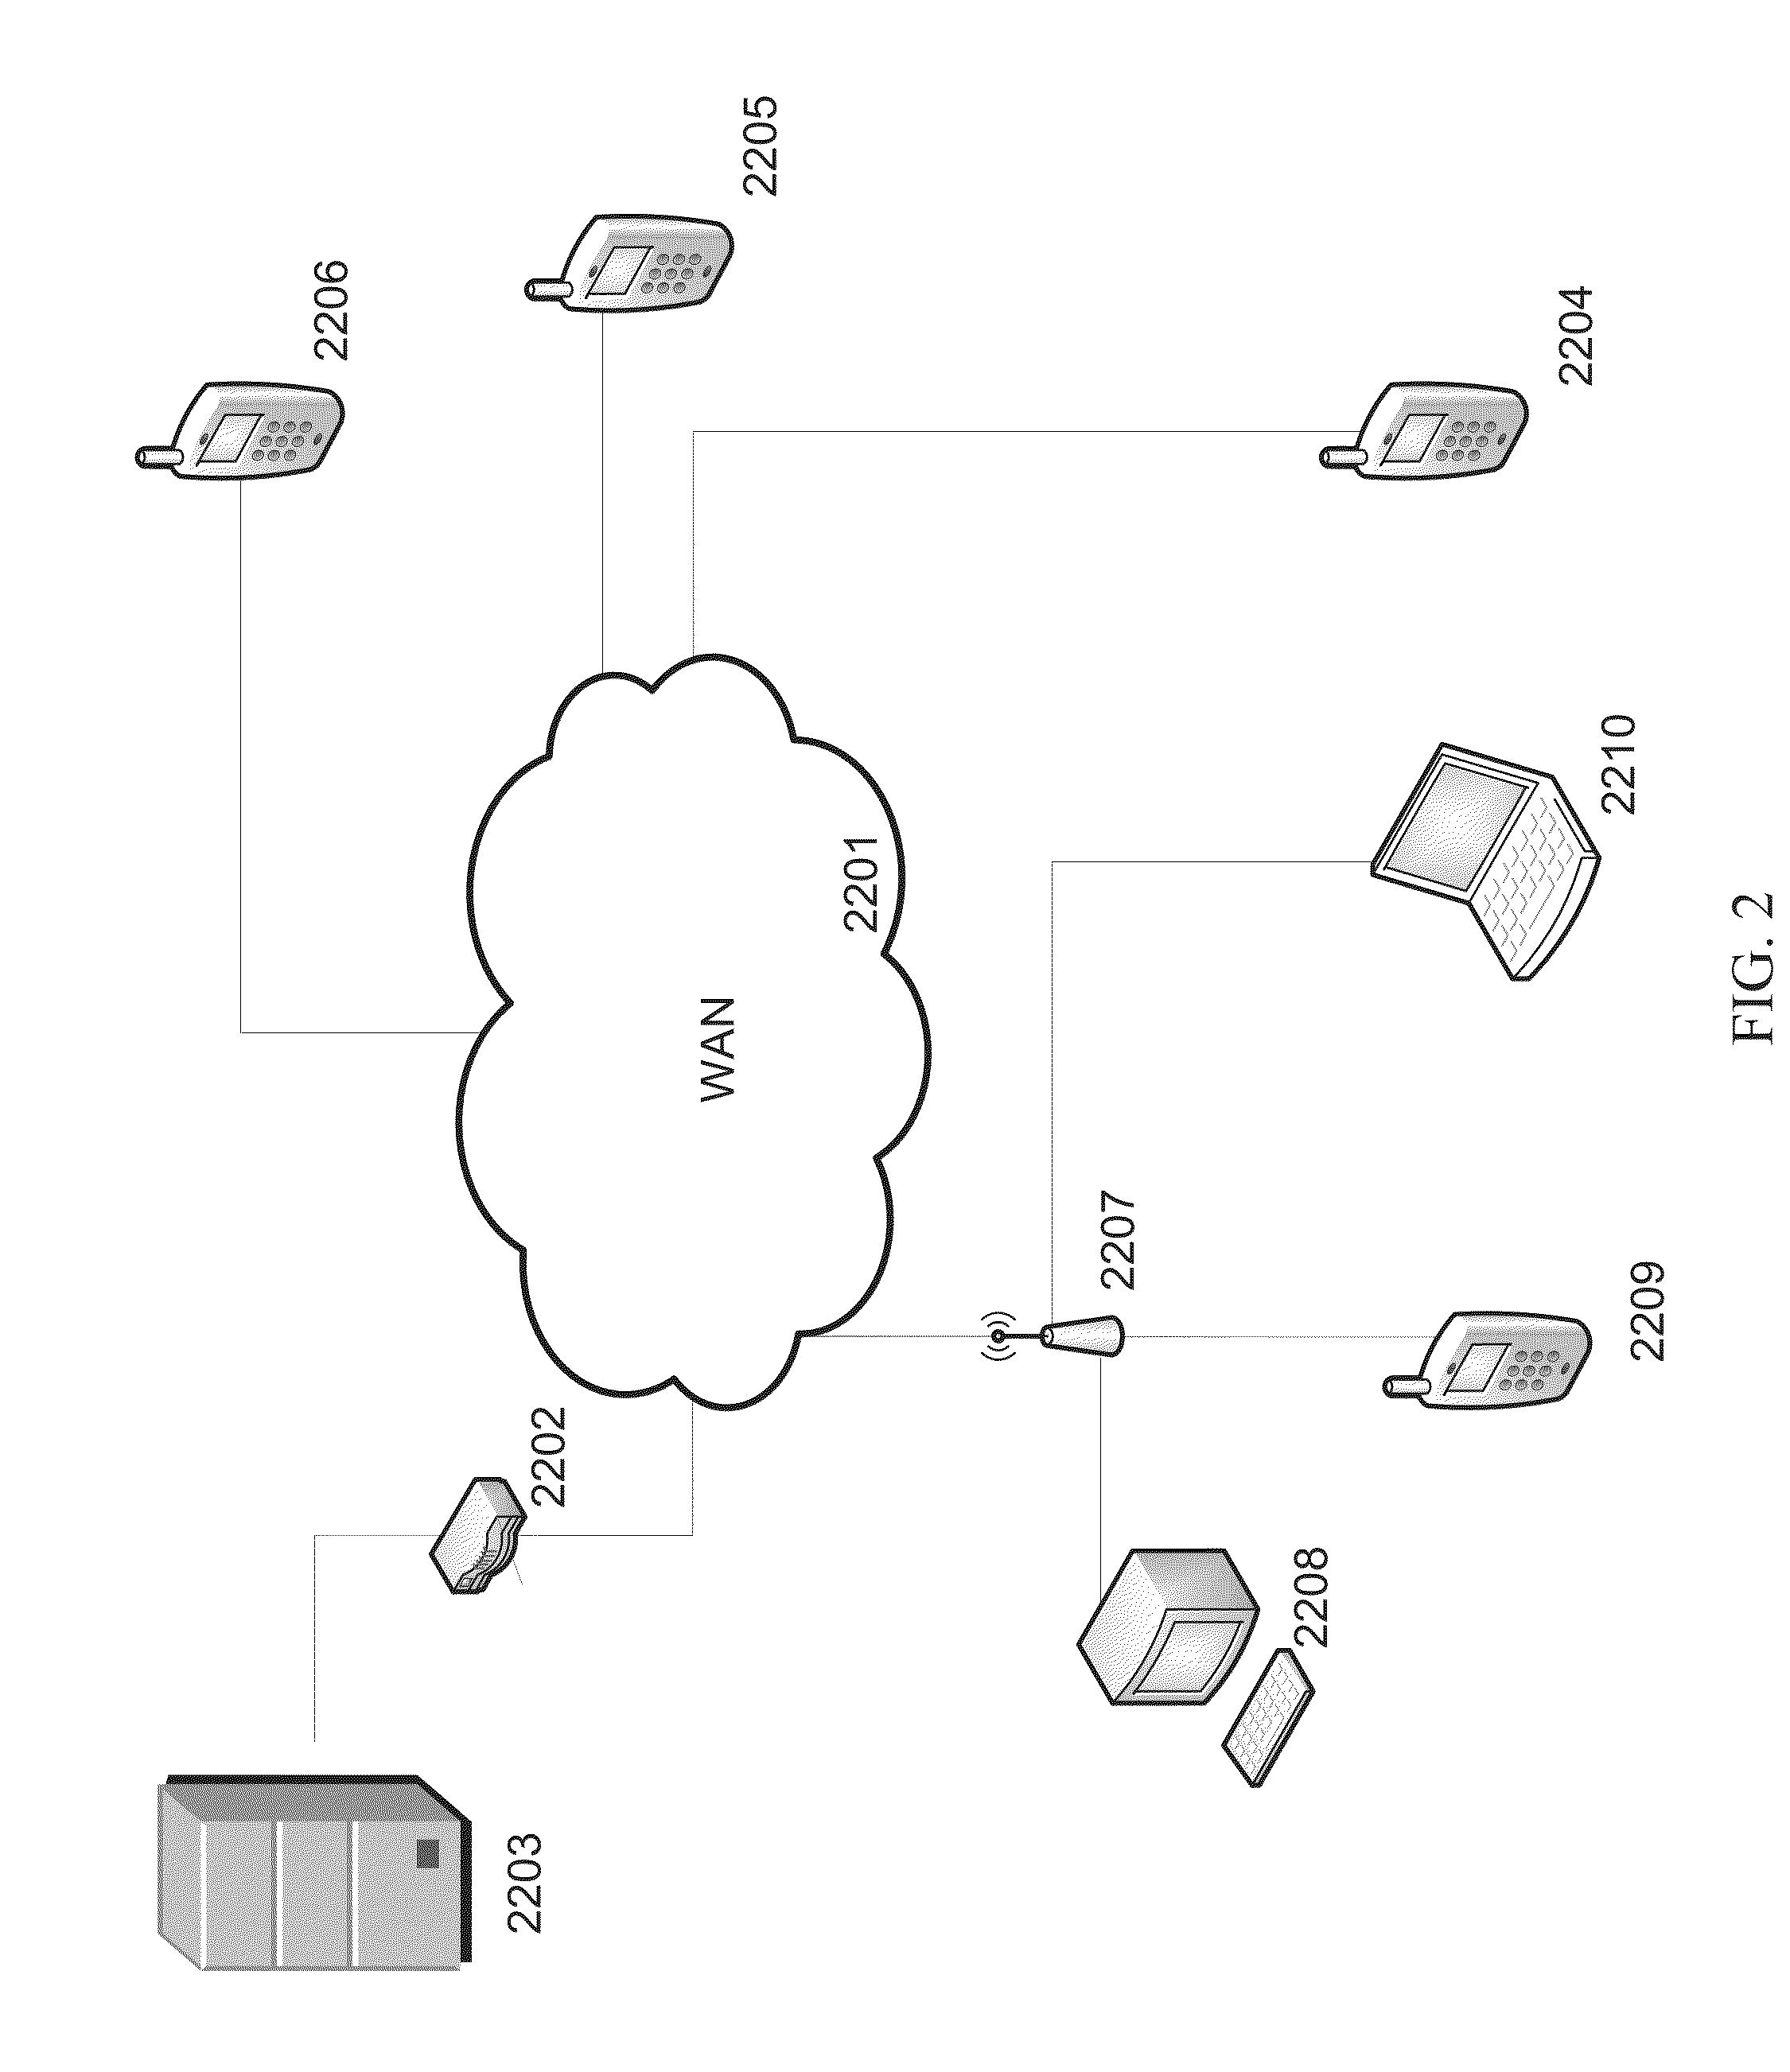 System and method for analyzing and reporting heatlh plan management performance